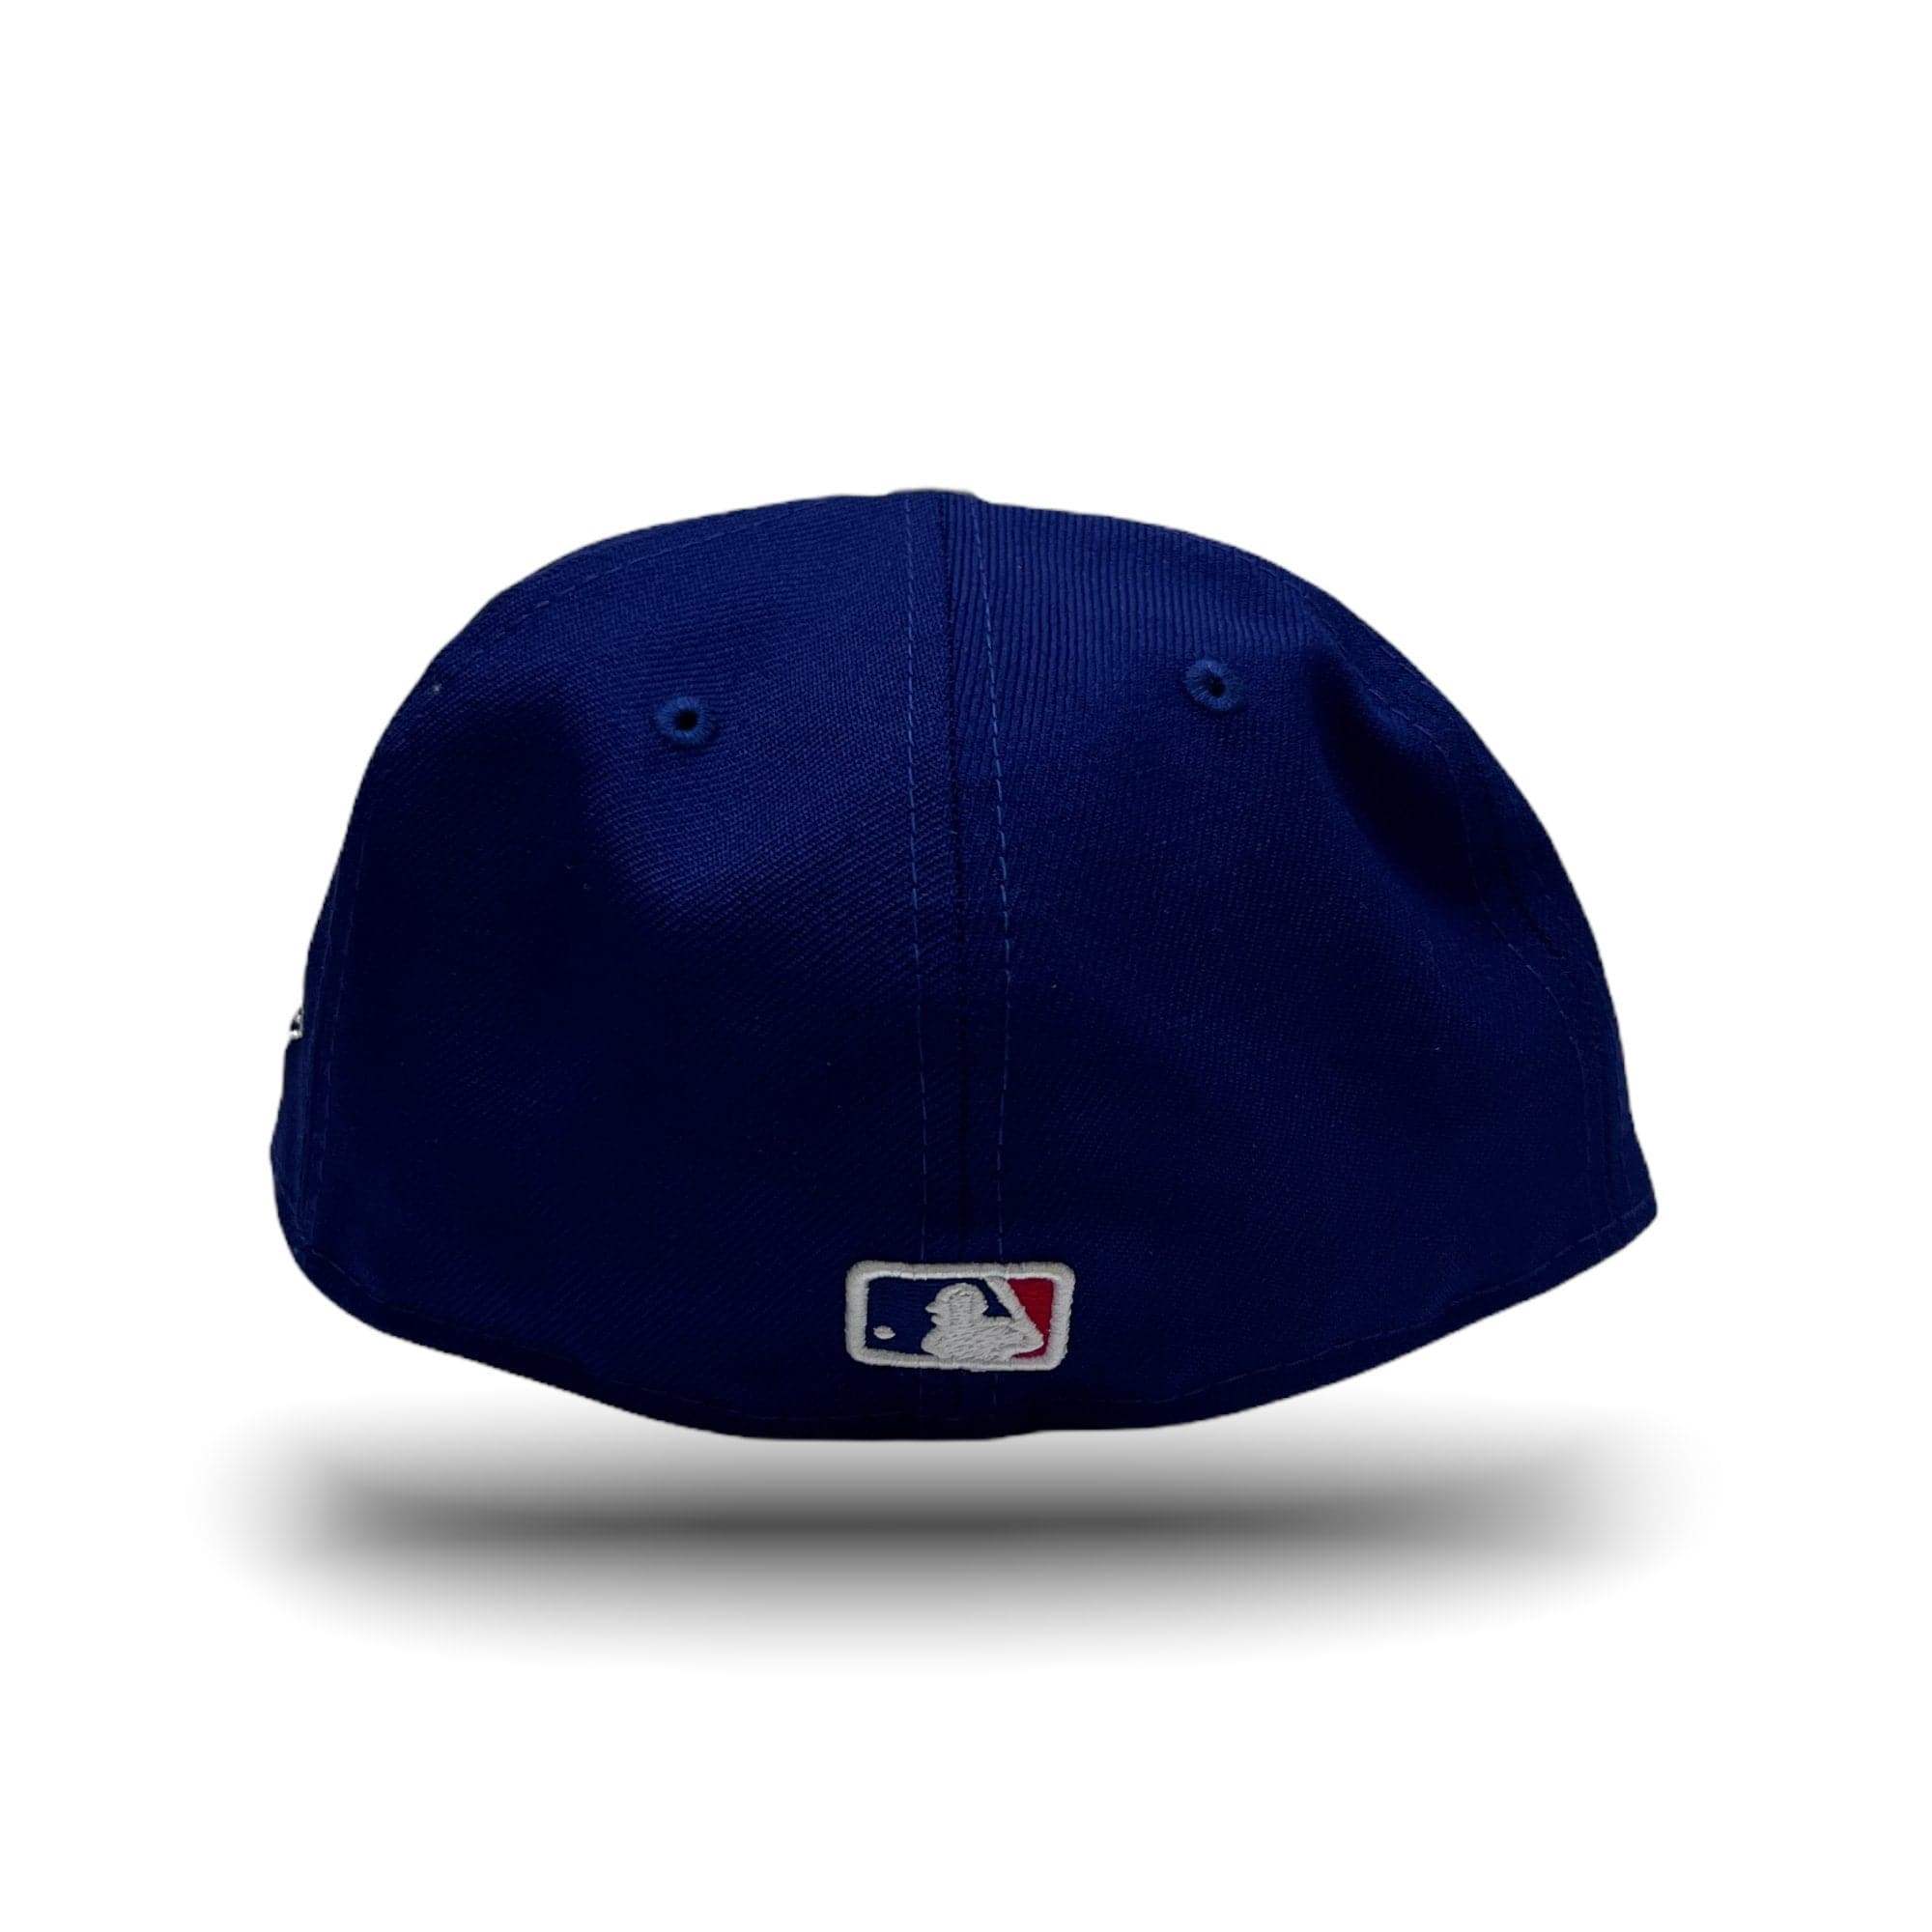 NEW ERA 59FIFTY - LOS ANGELES DODGERS GREY BOTTOM/2020 WS CHAMPS SIDE PATCH FITTED CAP (BLACK BAND) (DARK ROYAL) - The Magnolia Park